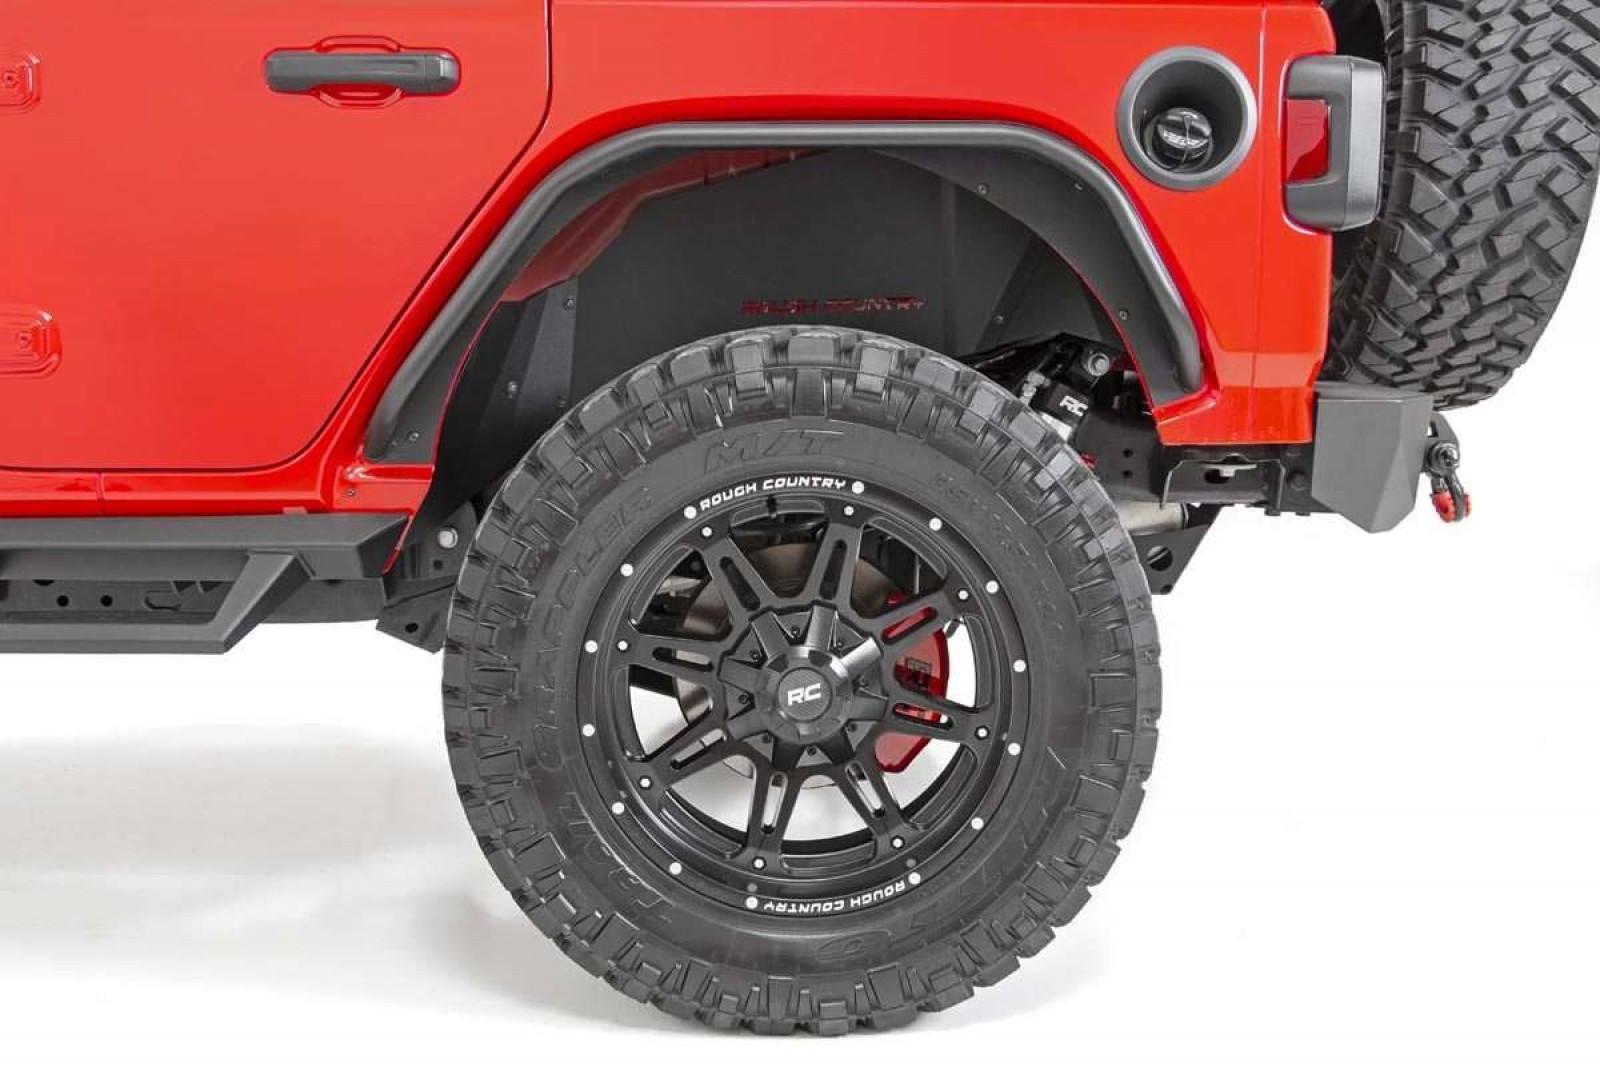 Rough Country One-Piece Series 94 Wheel, 20x10 (8x170)